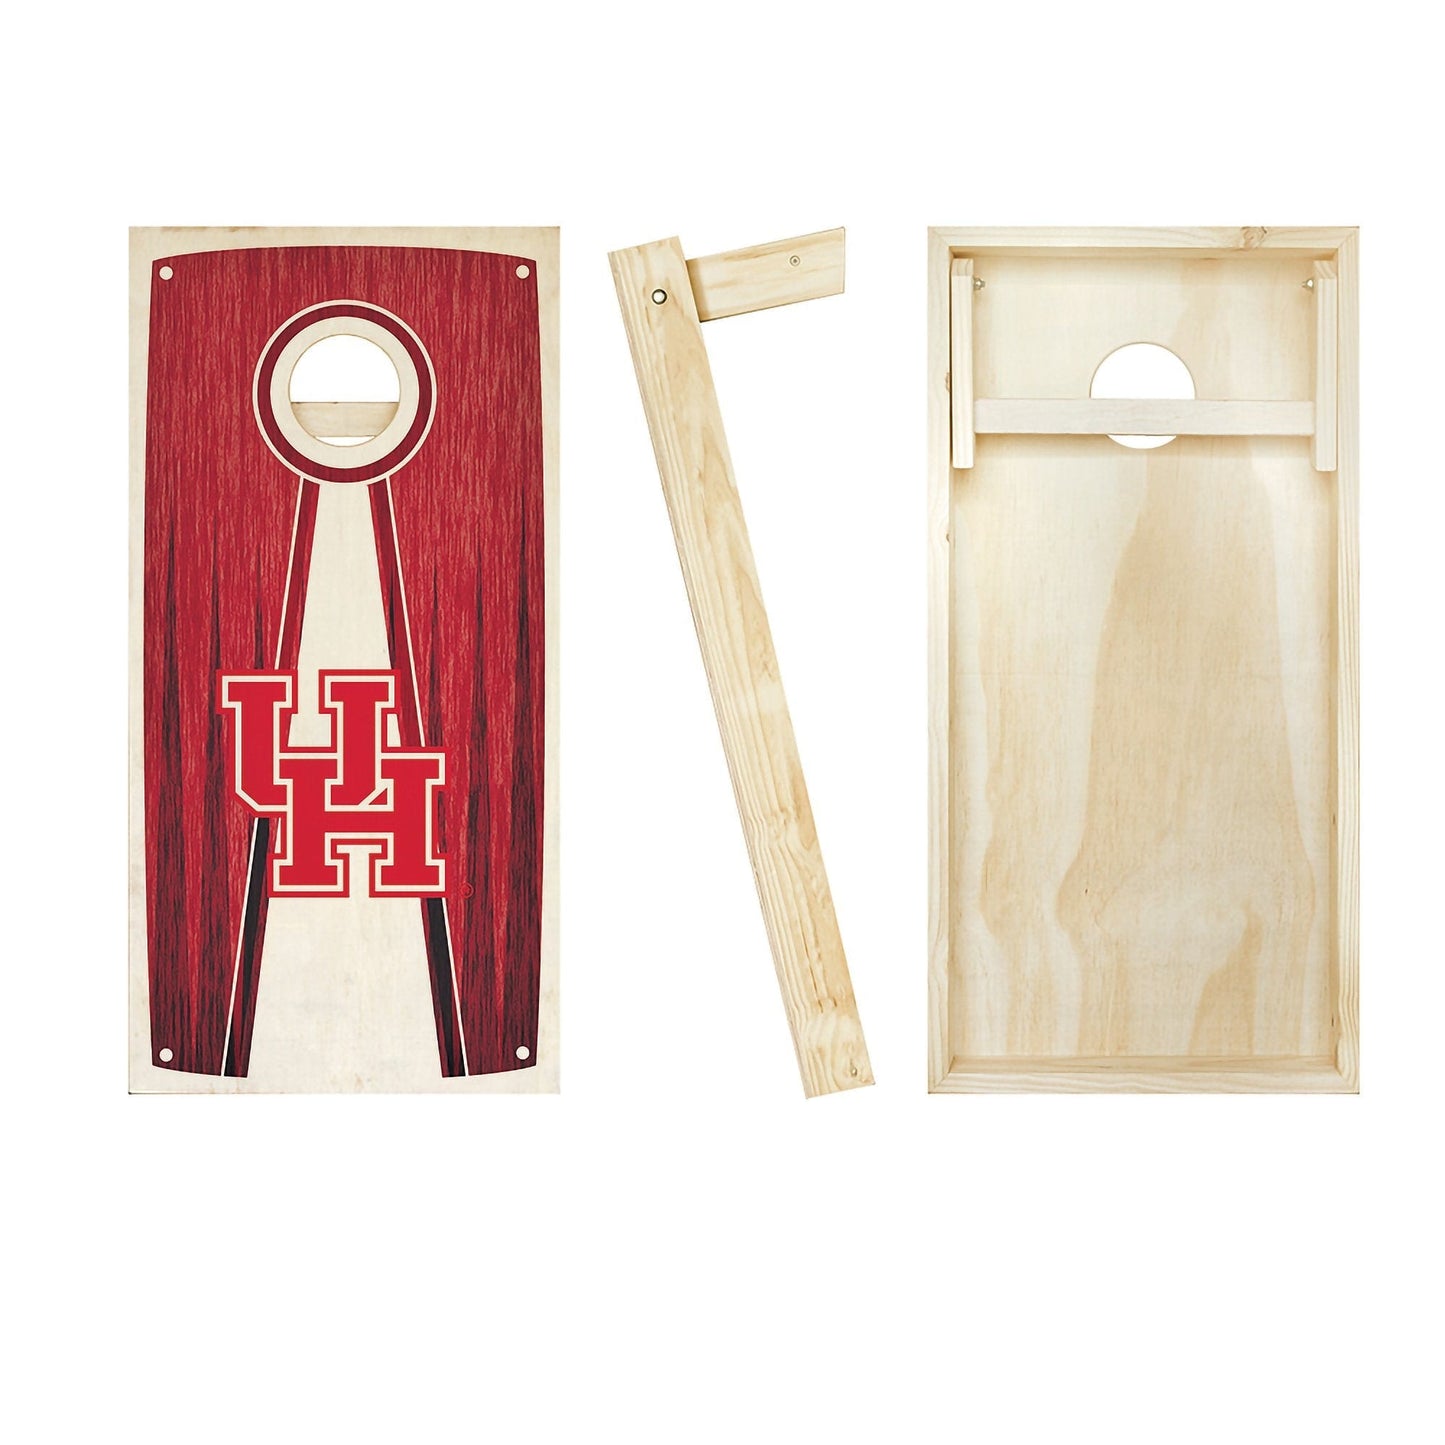 Houston Cougars Stained Pyramid board entire set